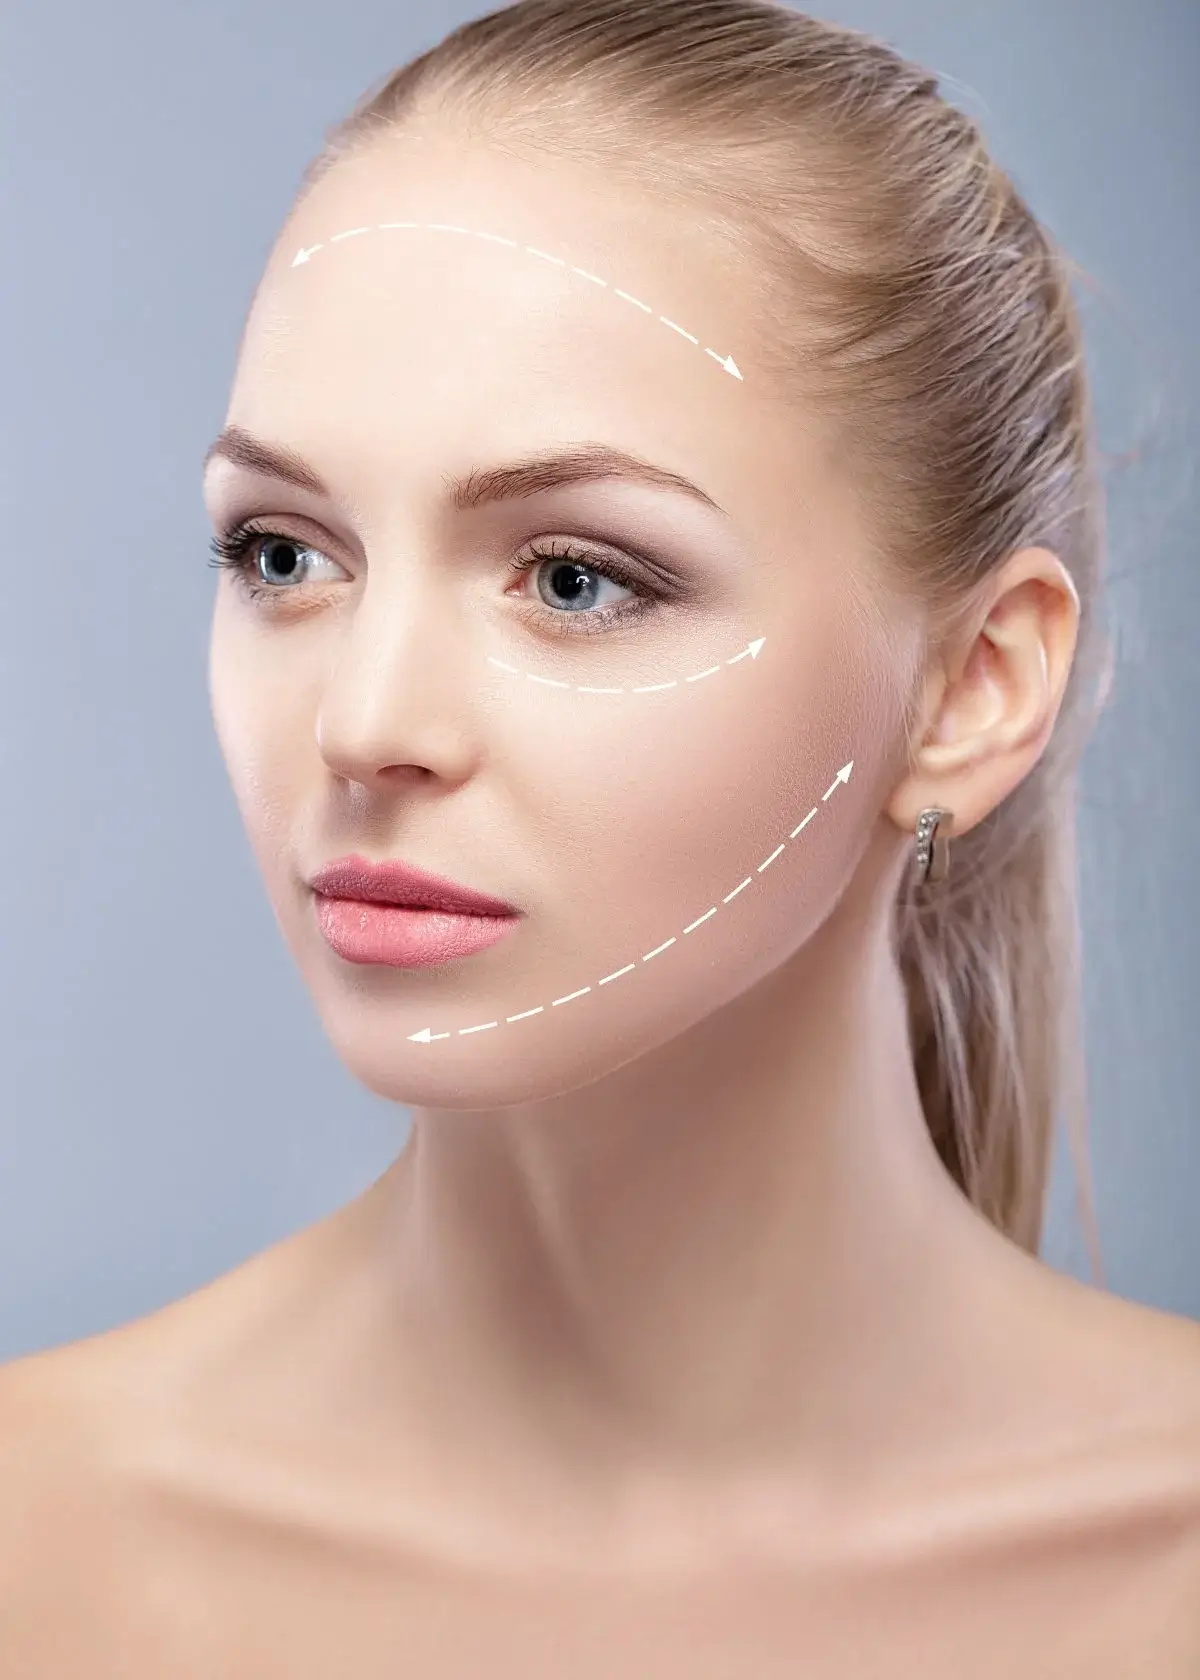 How does Face Lift Tape work?